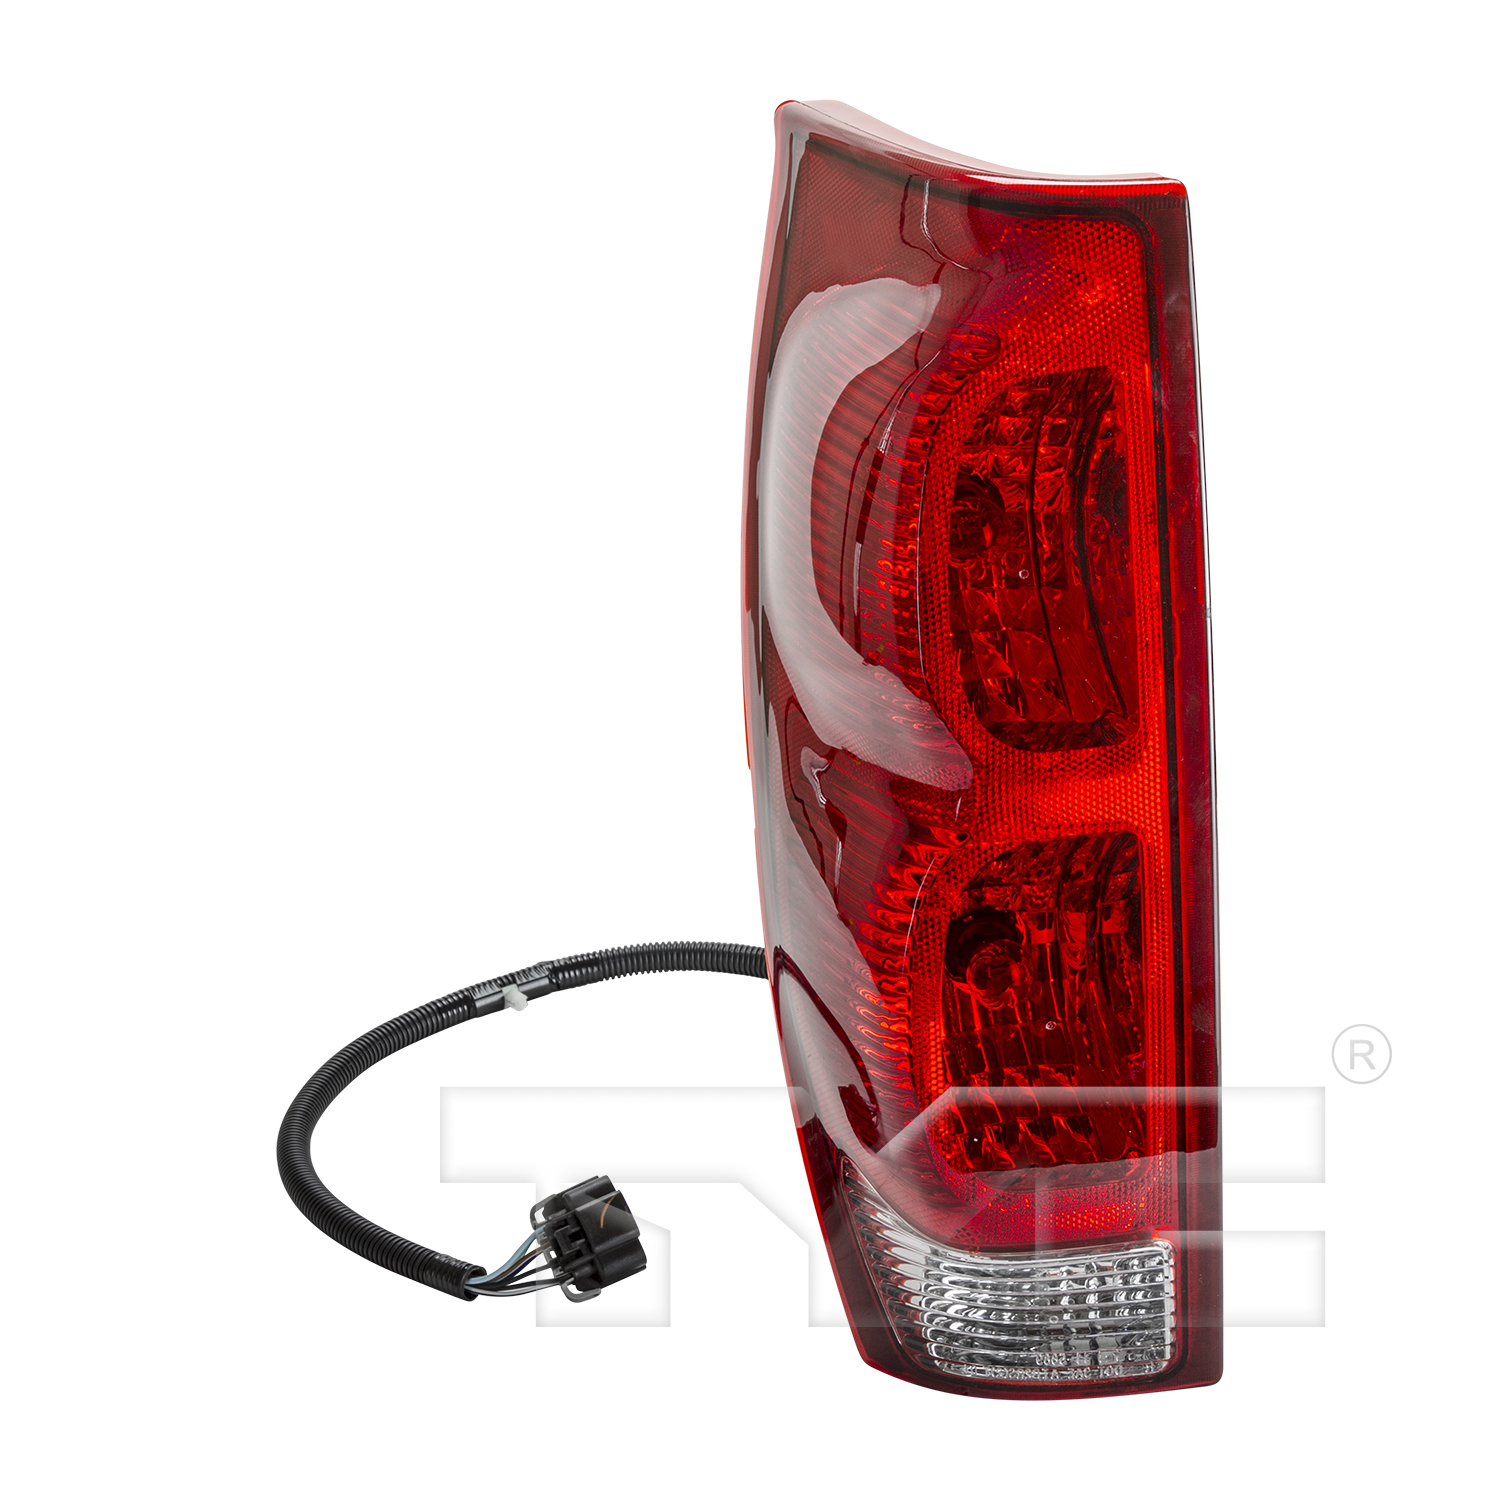 Aftermarket TAILLIGHTS for CHEVROLET - AVALANCHE 1500, AVALANCHE 1500,02-06,LT Taillamp assy